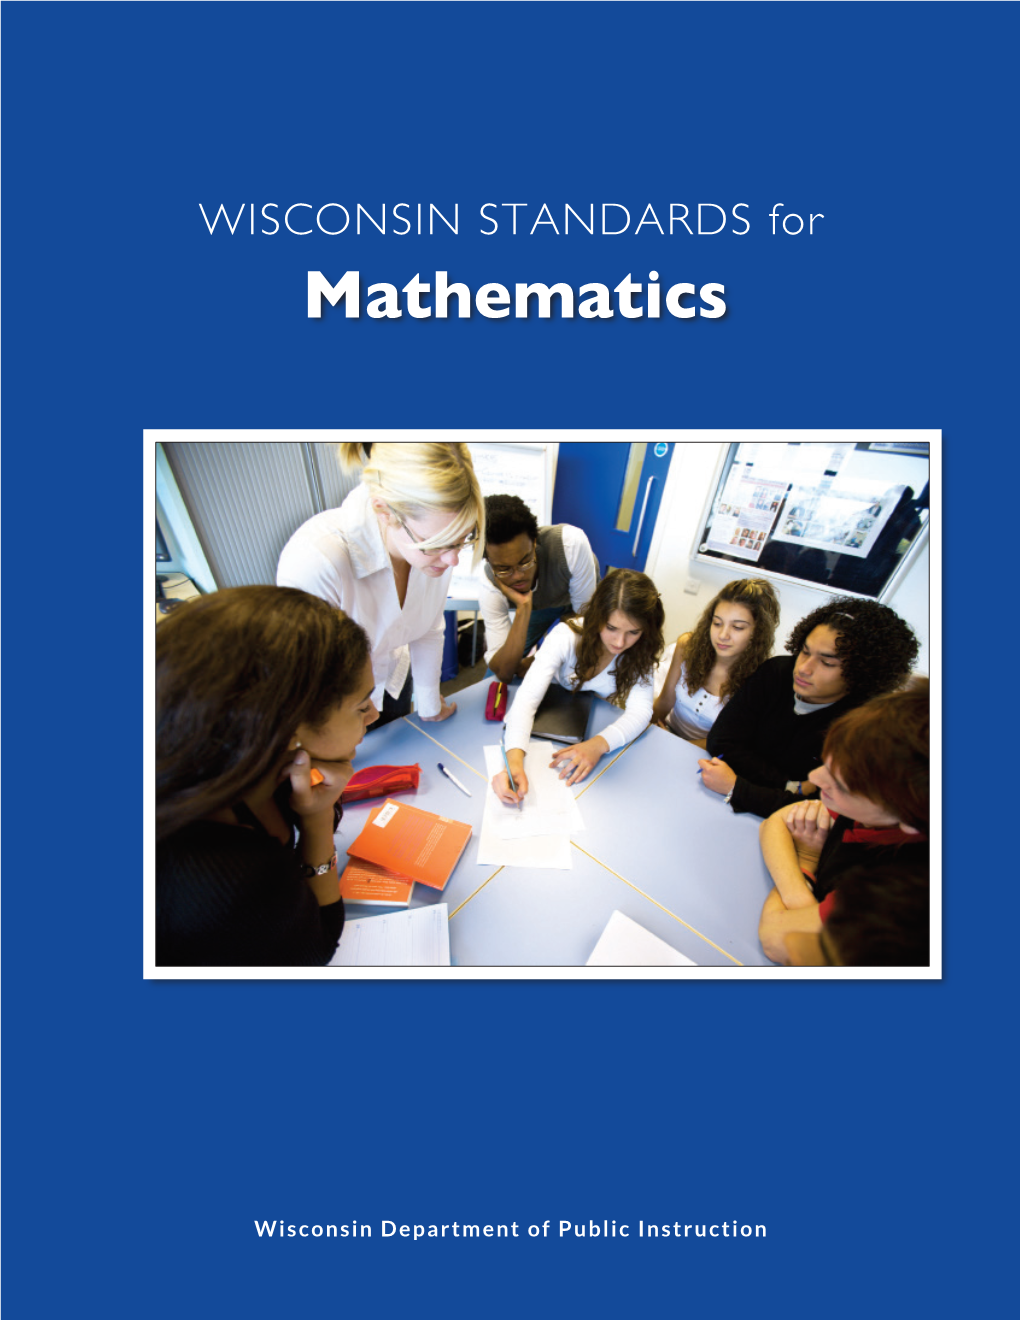 Common Core State Standards for Mathematics (1-93)*